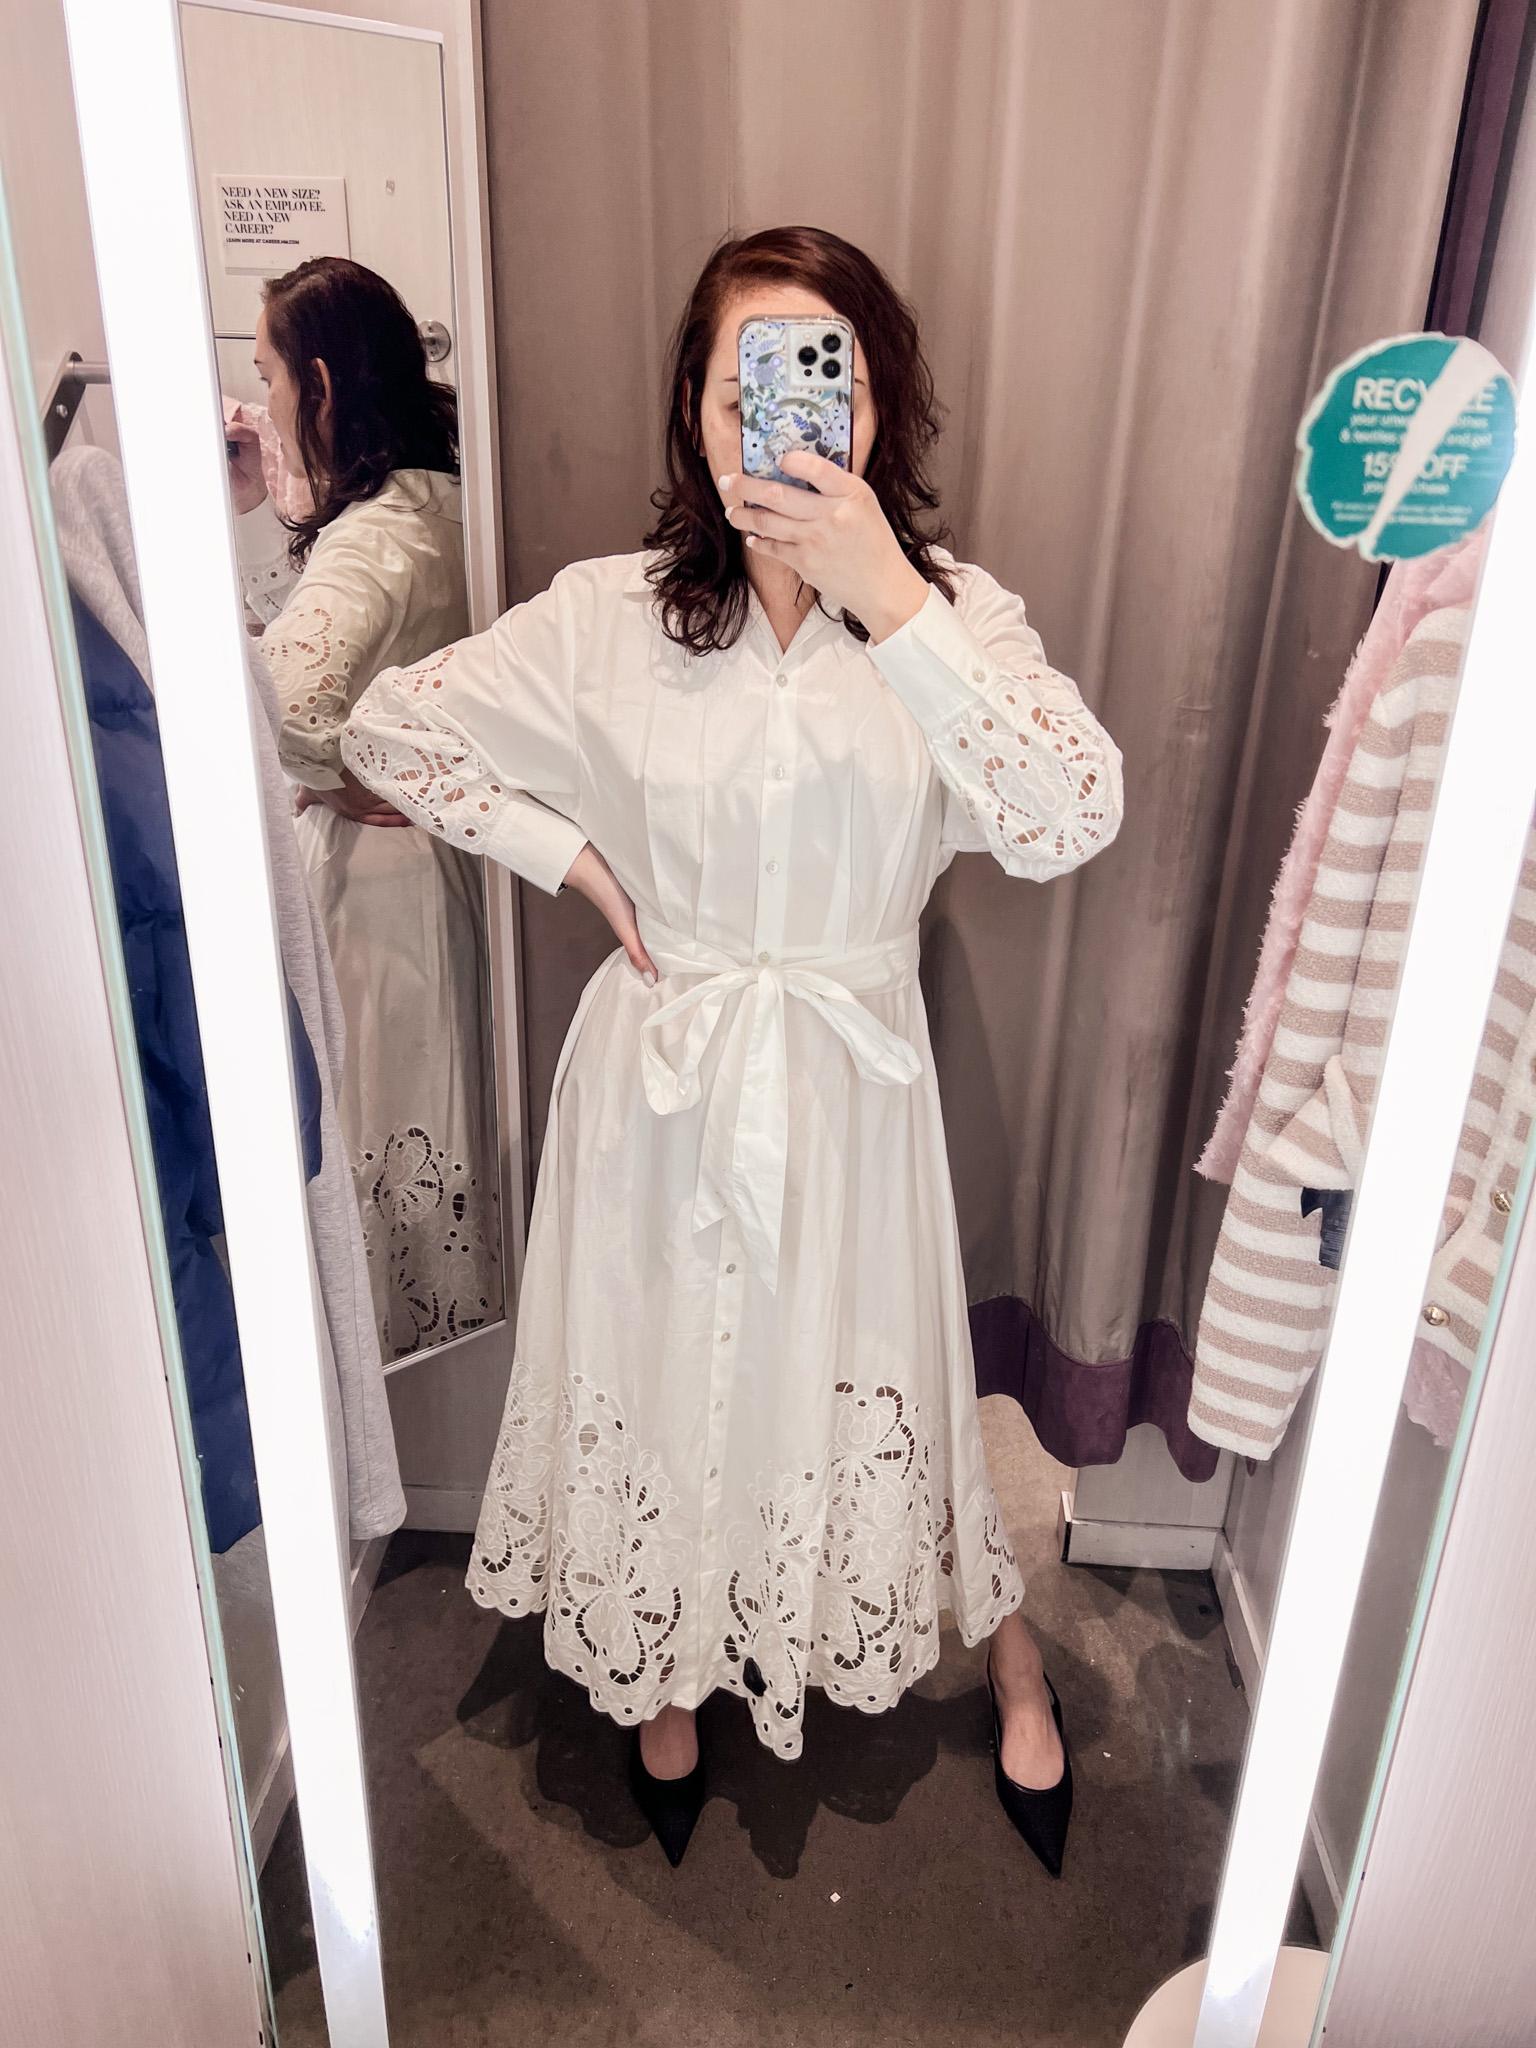 How To Style A White Lace Midi Dress